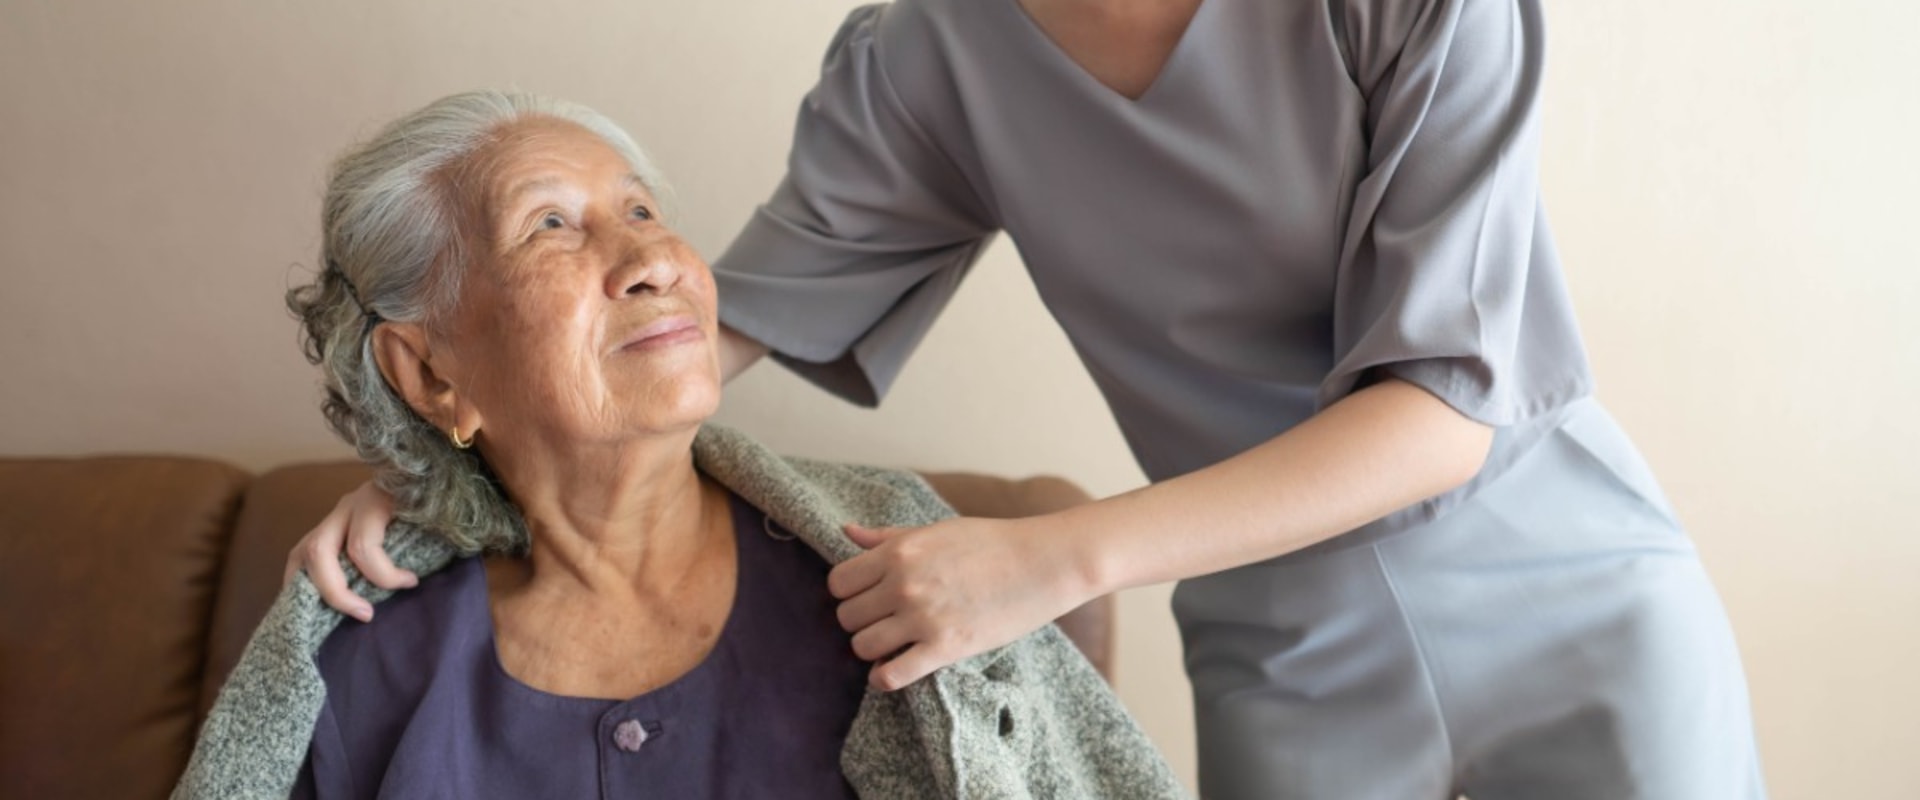 What Types of Care are Available for Elderly Home Care?